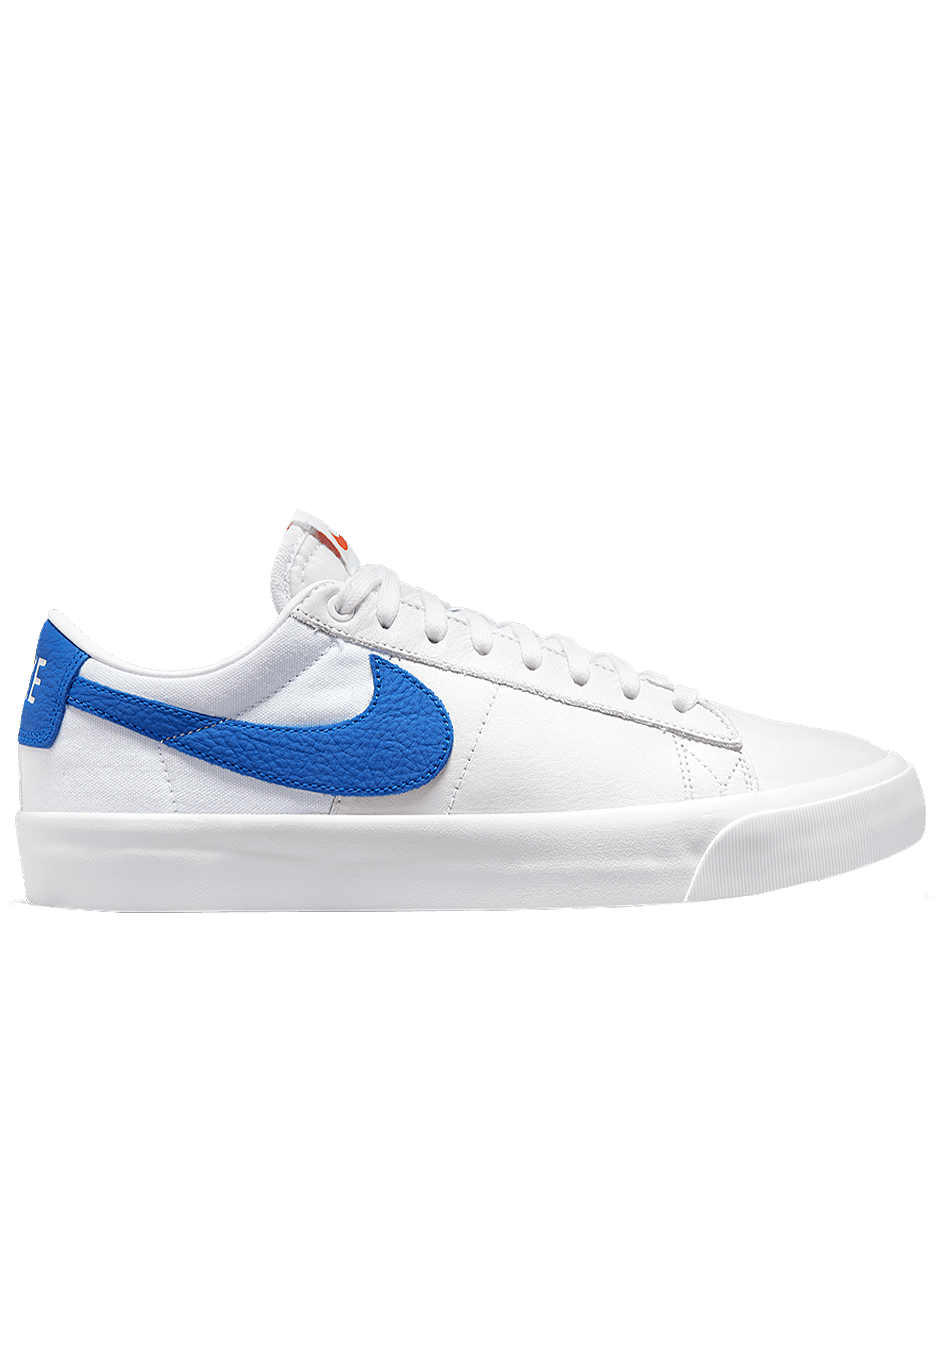 Nike SB ZOOM Blazer Low Pro GT ISO White Varsity Royal DH5675-100 ONLINE ONLY